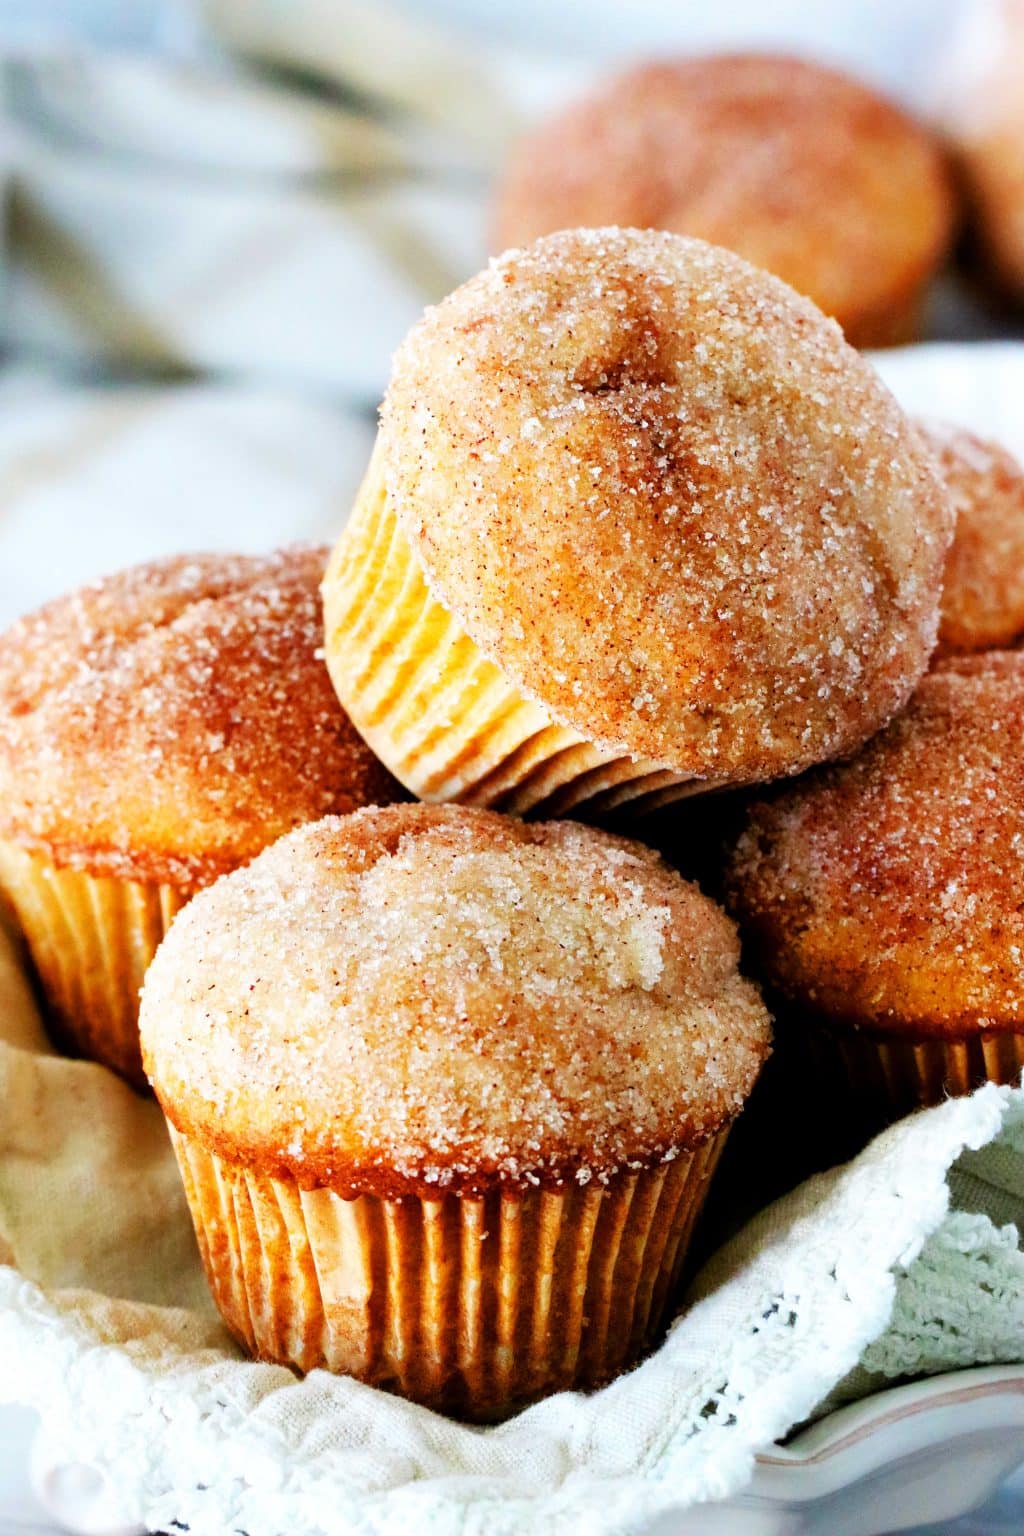 Easy Cinnamon Muffins Recipe - The Anthony Kitchen